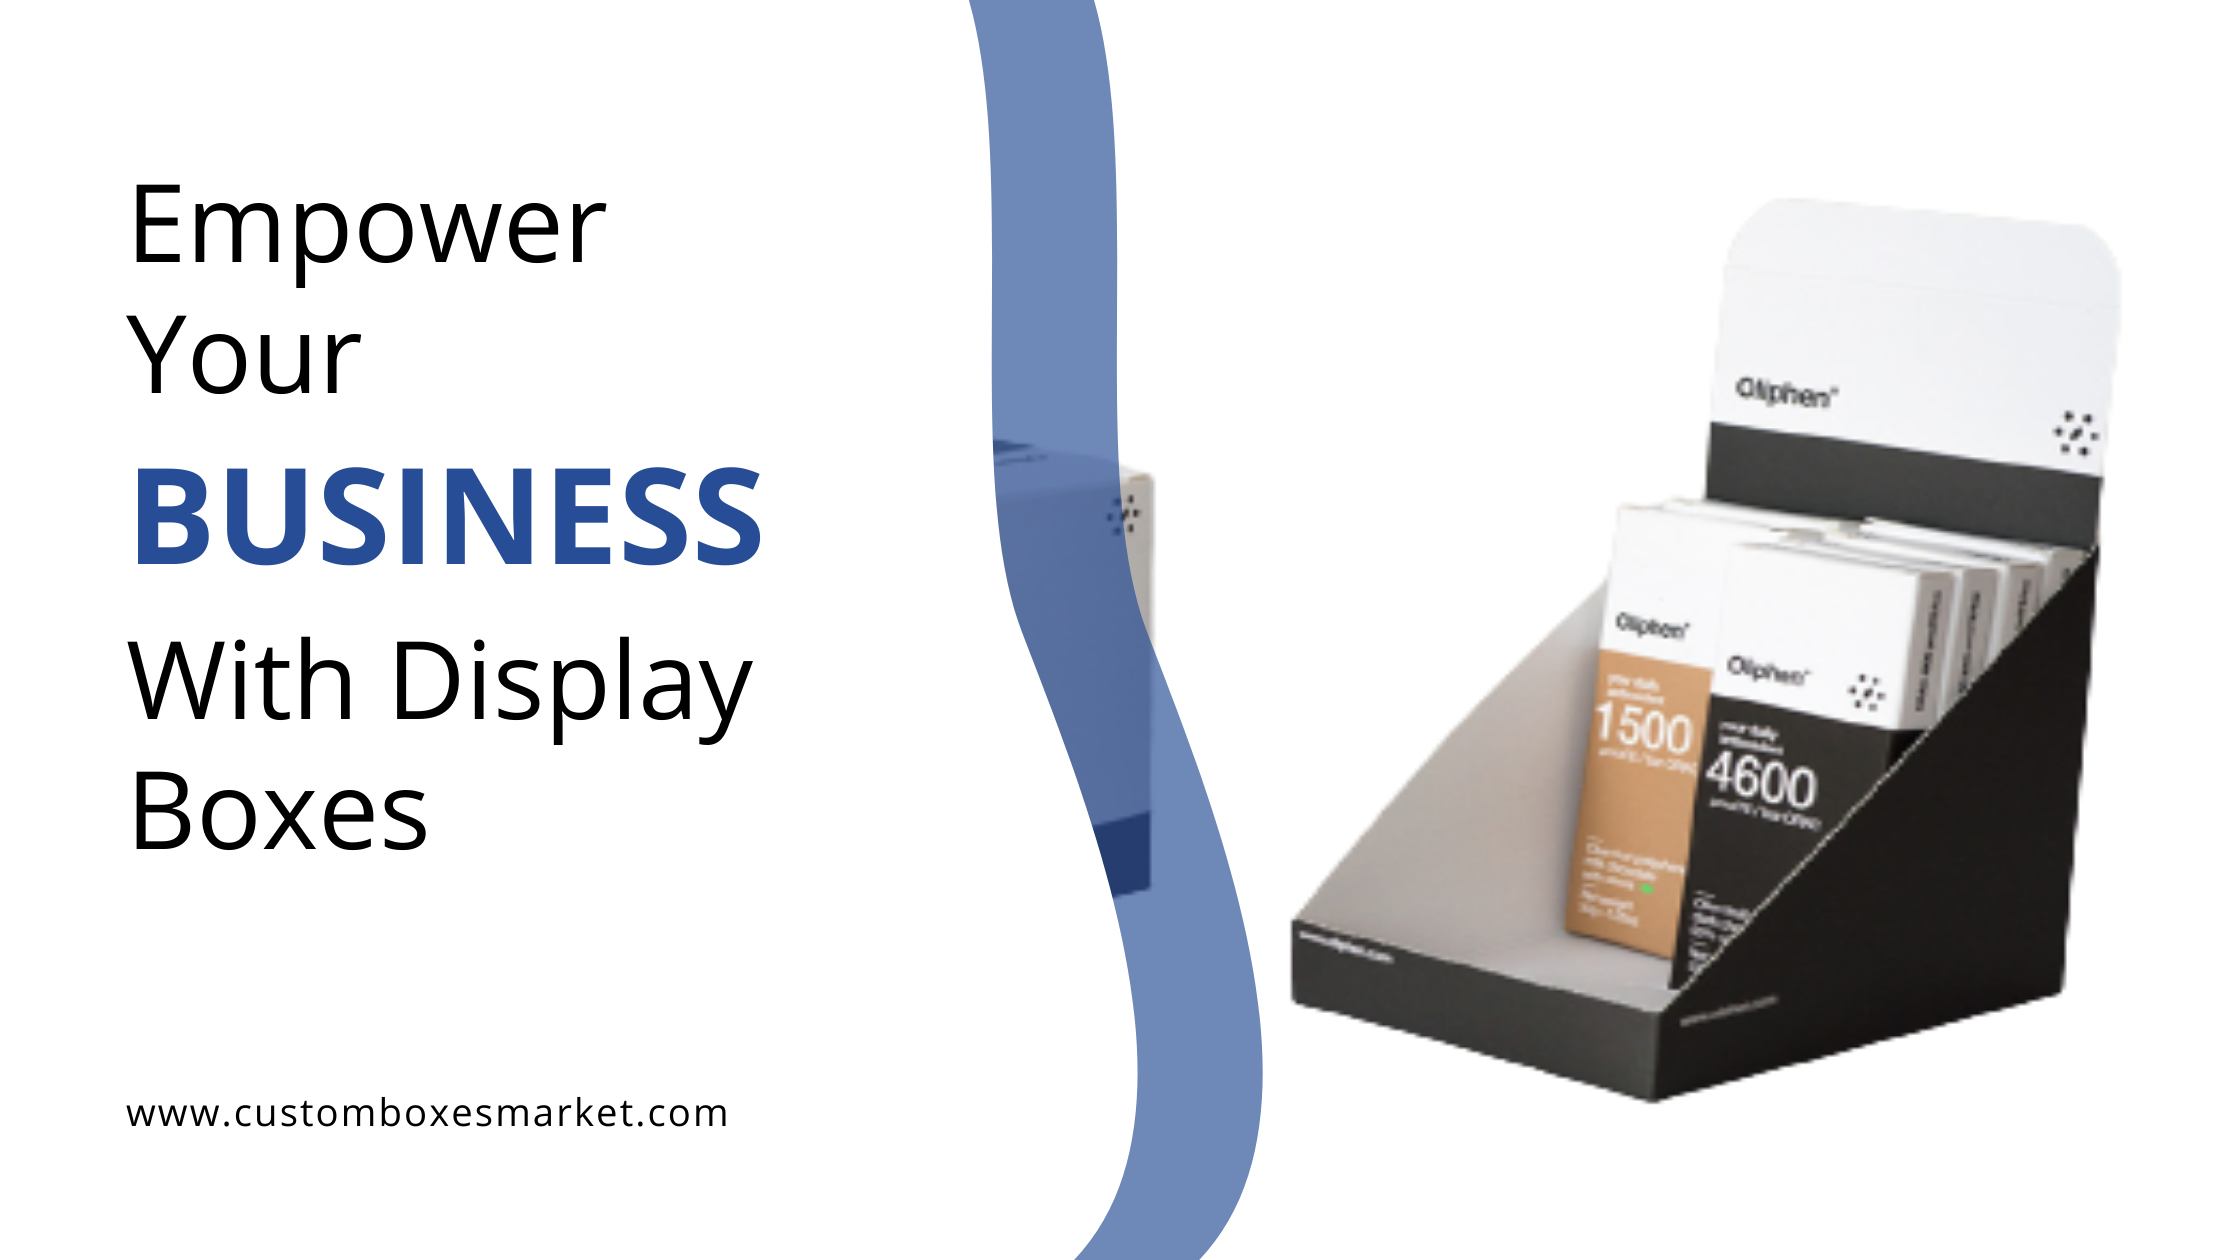 Empower Your Business With Display Boxes